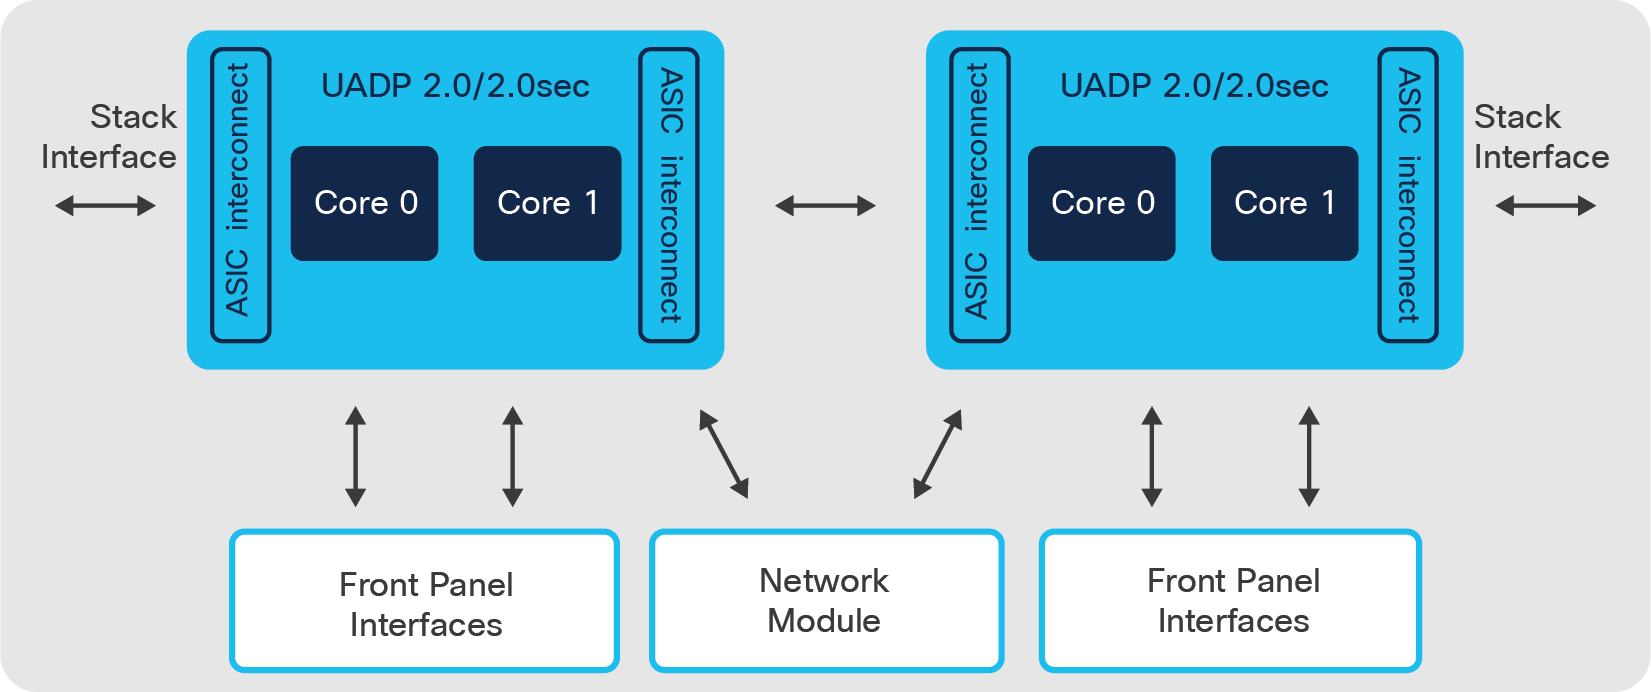 Catalyst 9300 Switch architecture